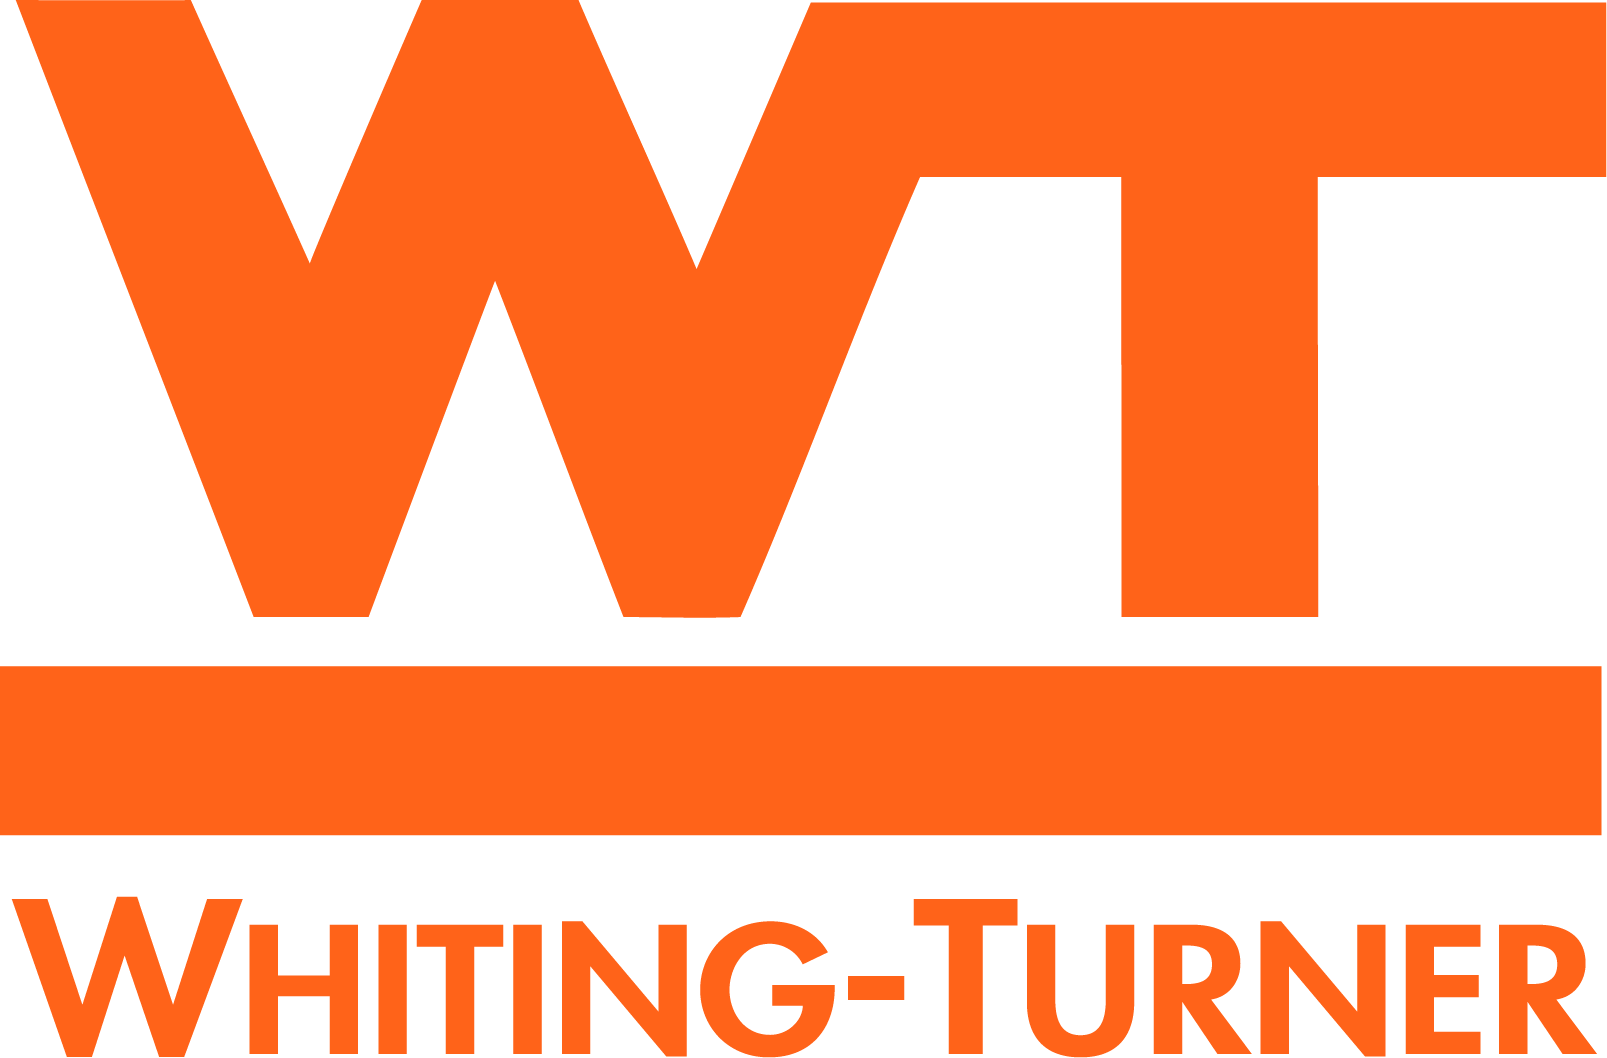 Whiting-Turner Contracting